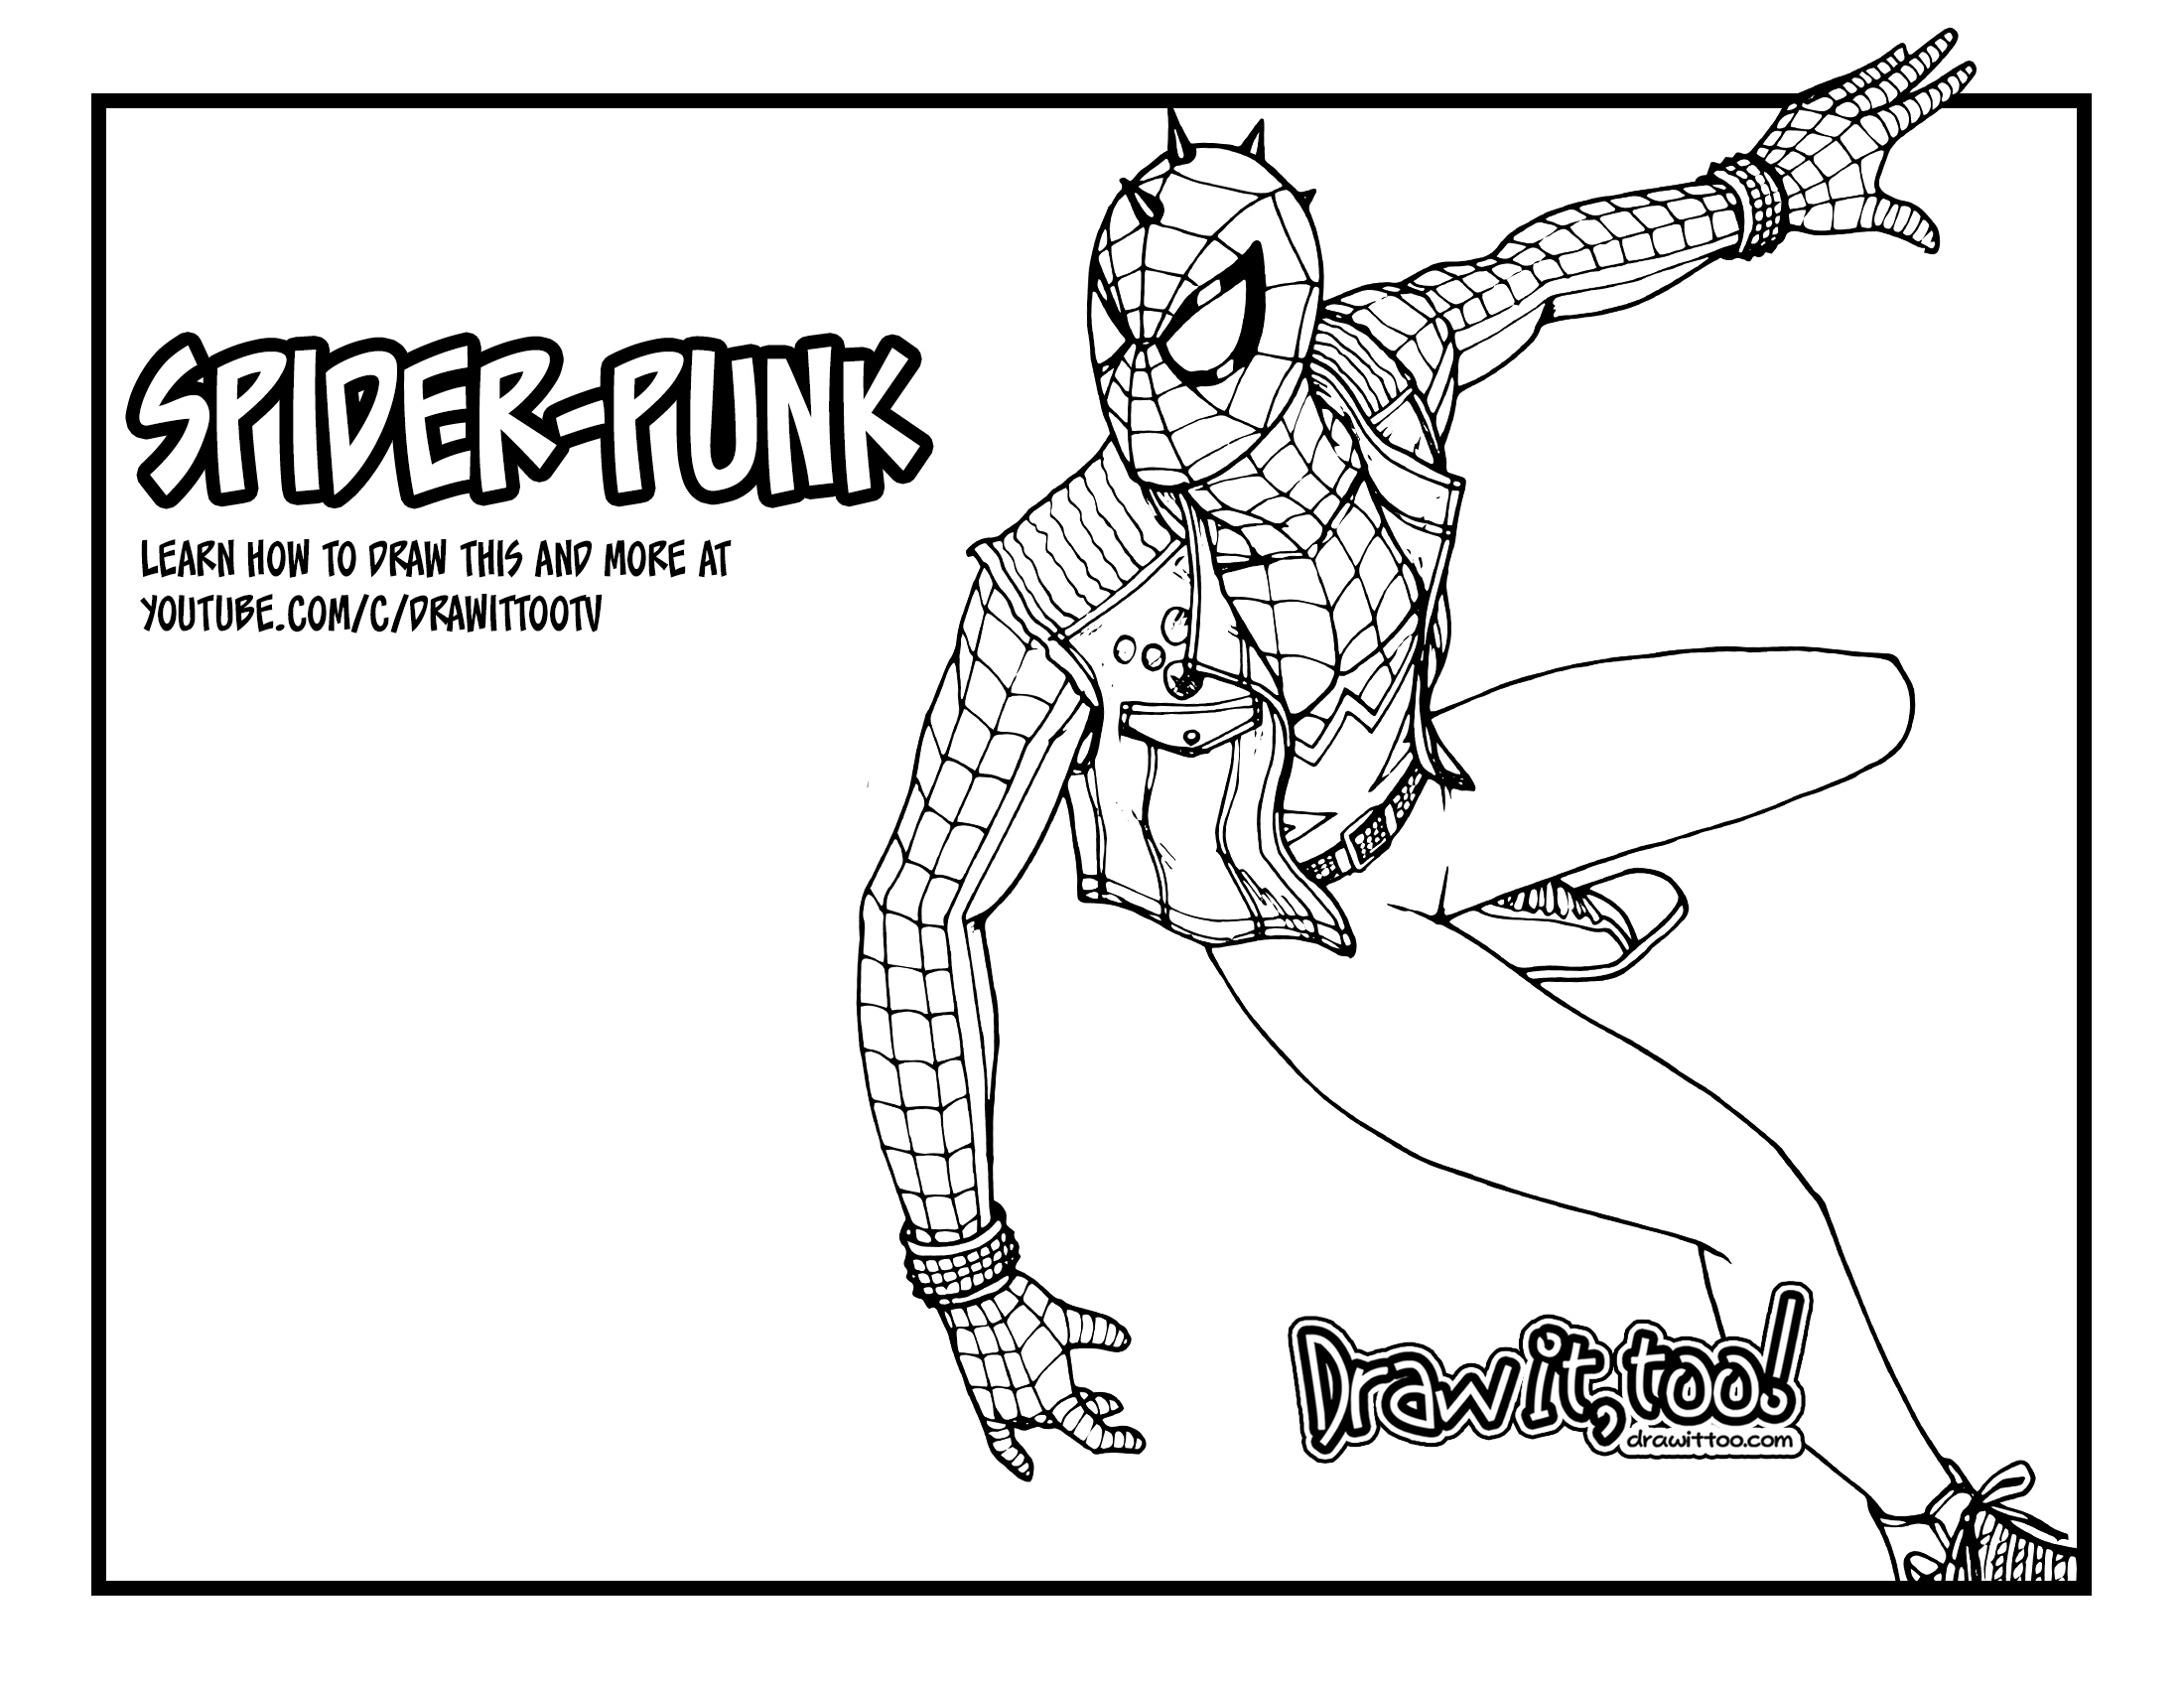 To Draw Spider Punk Man Ps4 Drawing Tutorial Coloring 9th Grade Math Quiz  Toru Kumon Spider Man Ps4 Coloring Pages Coloring Pages lattice math  problems xtra math number sequence puzzles math reviewer